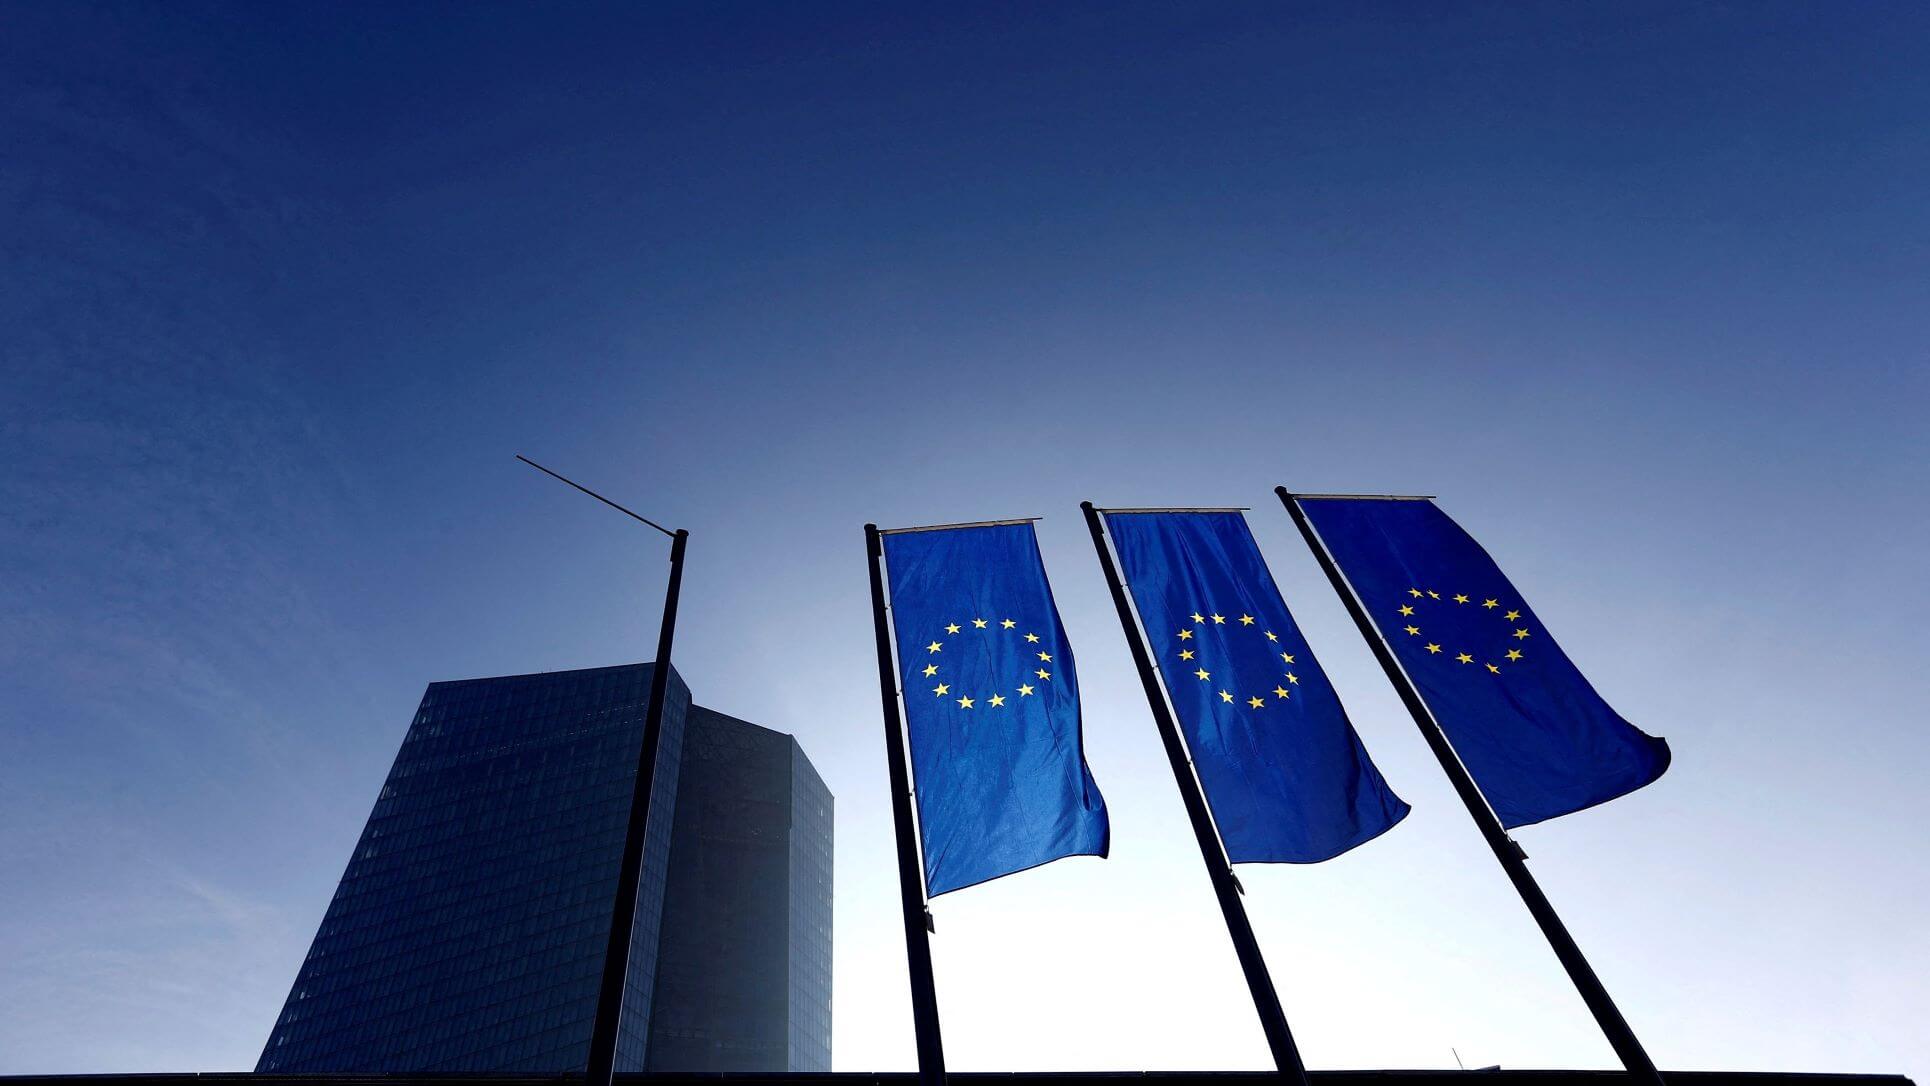 EU Should Look To Global Tech Innovation Leaders To Realise Economic Security Ambitions